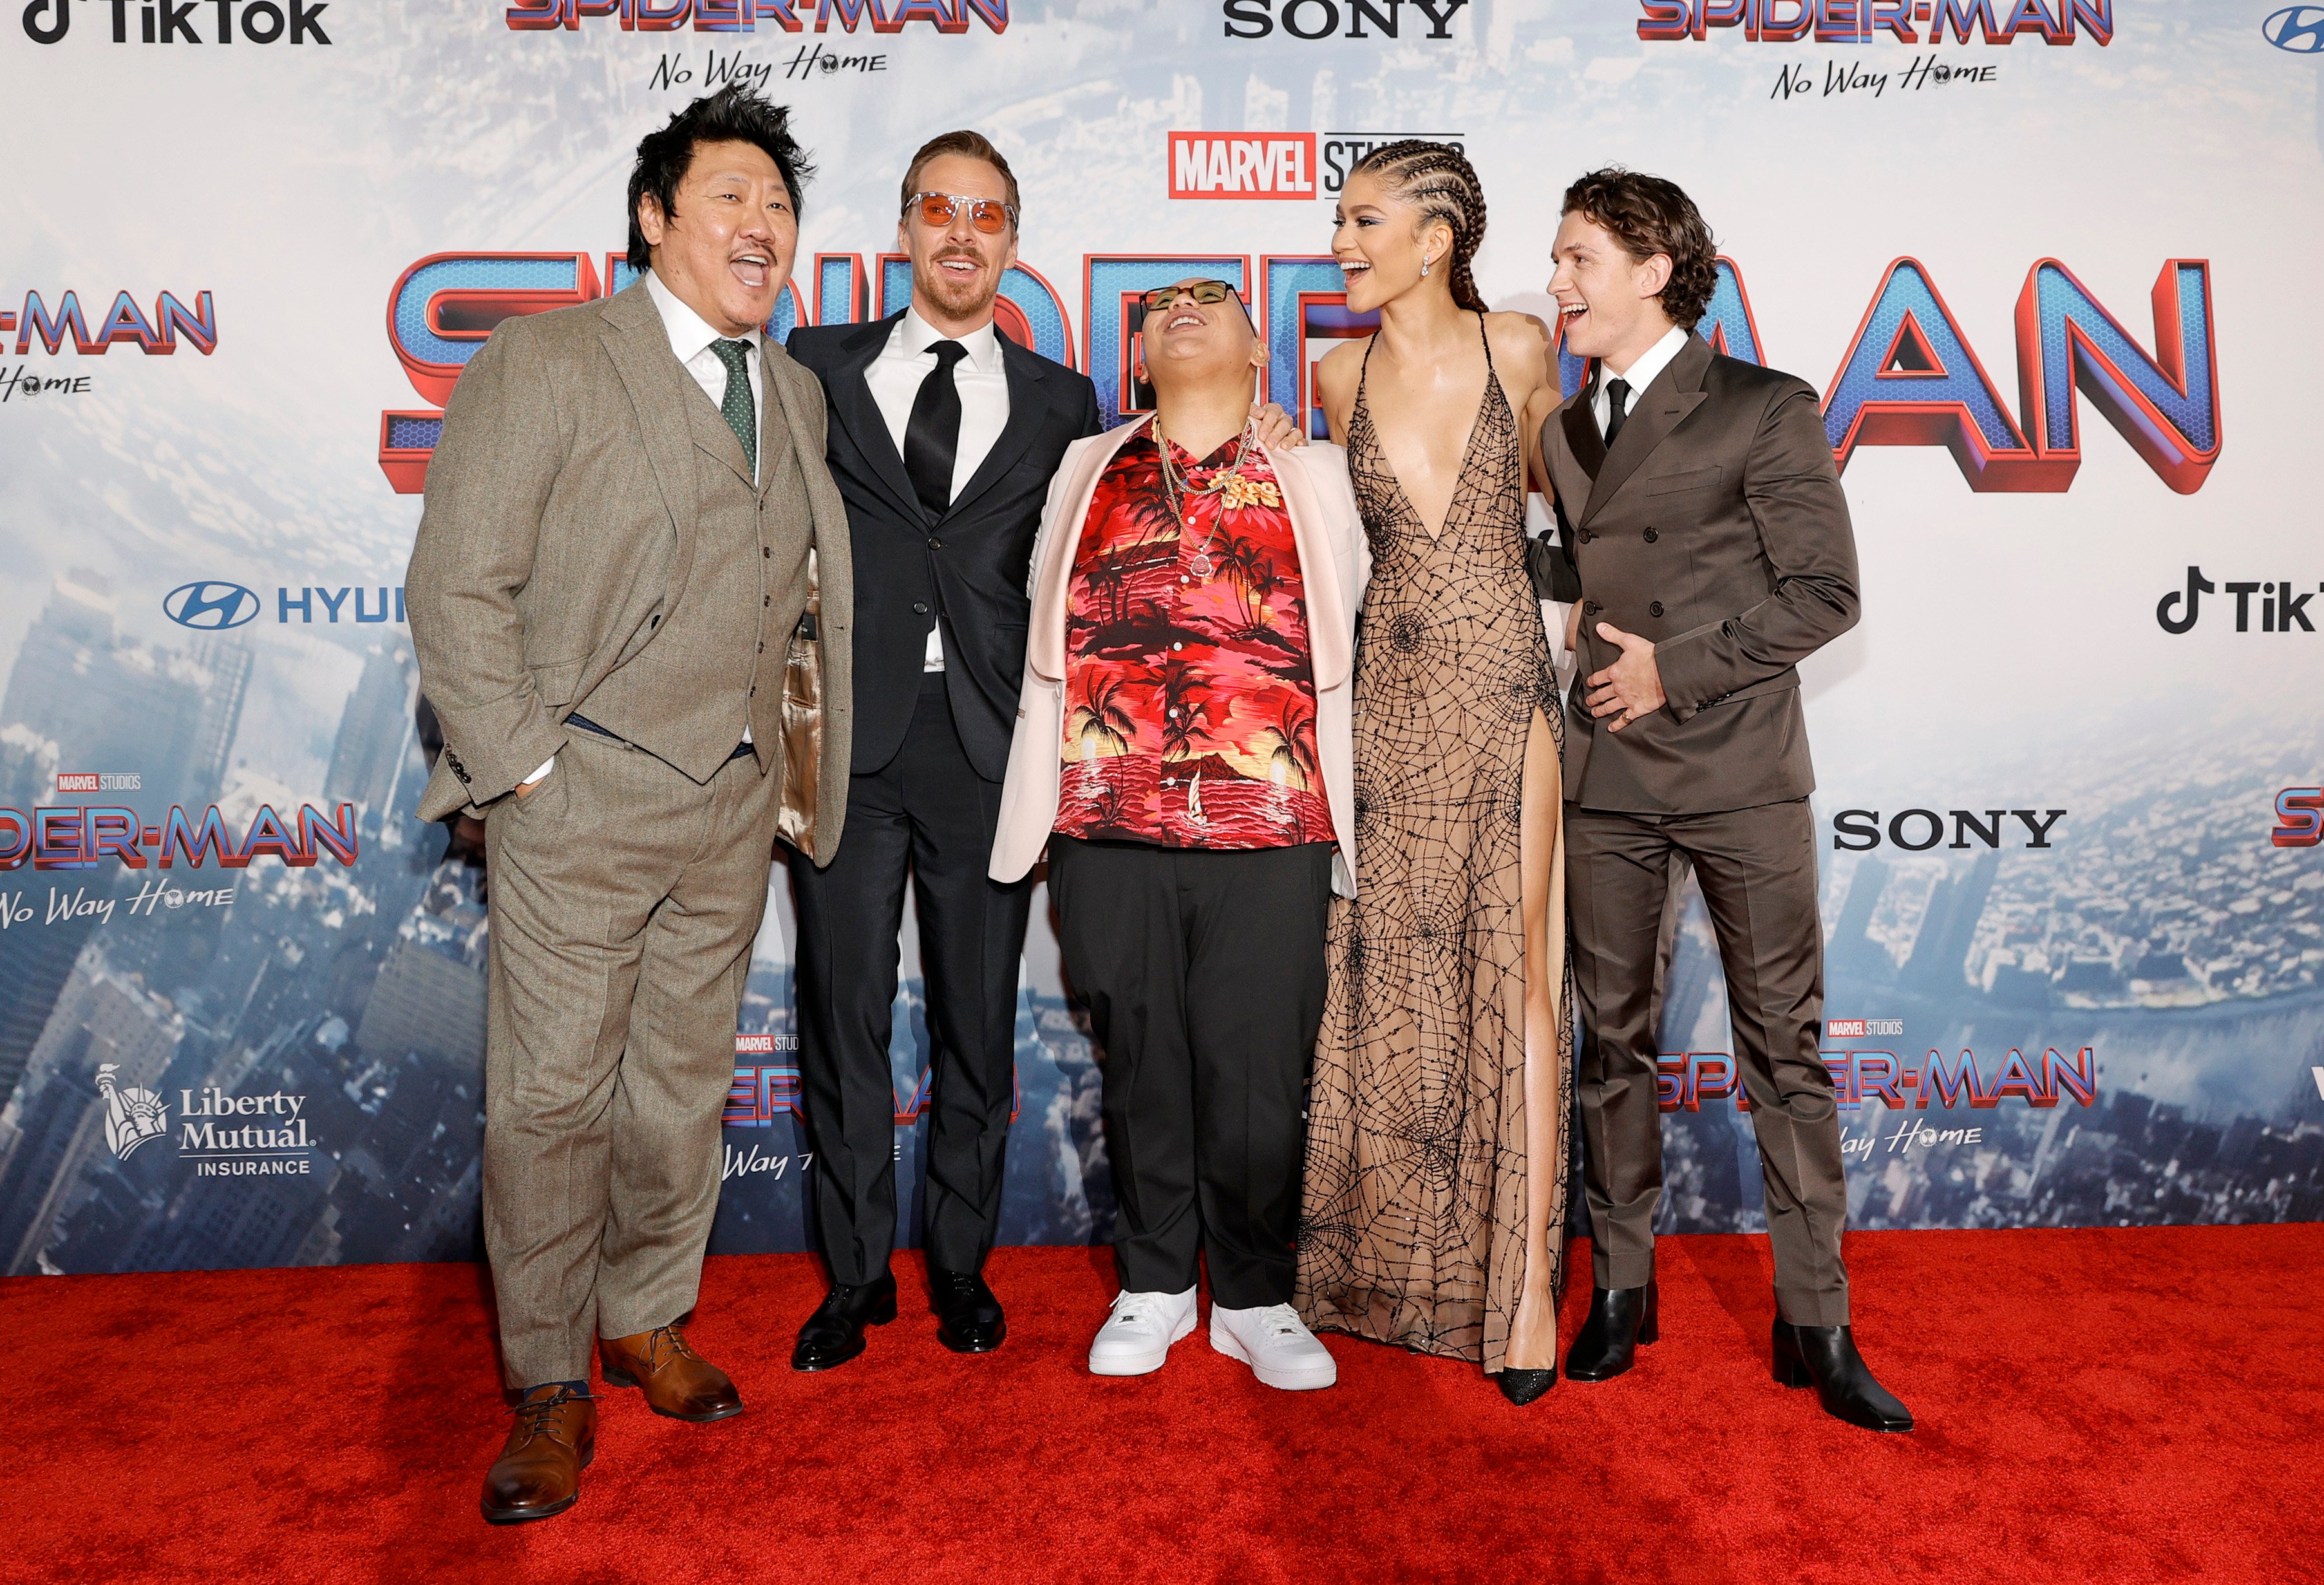 Benedict Wong, Benedict Cumberbatch, Jacob Batalon, Zendaya, and Tom Holland pose for pictures together on the red carpet for the premiere of 'Spider-Man: No Way Home,' which fans want to win the Fan-Favorite Award at the 2022 Oscars. Wong wears a gray suit. Cumberbatch wears a black suit. Batalon wears a white suit over a red Hawaiian shirt and black pants. Zendaya wears a tan dress with black spider webs. Holland wears a dark gray suit.